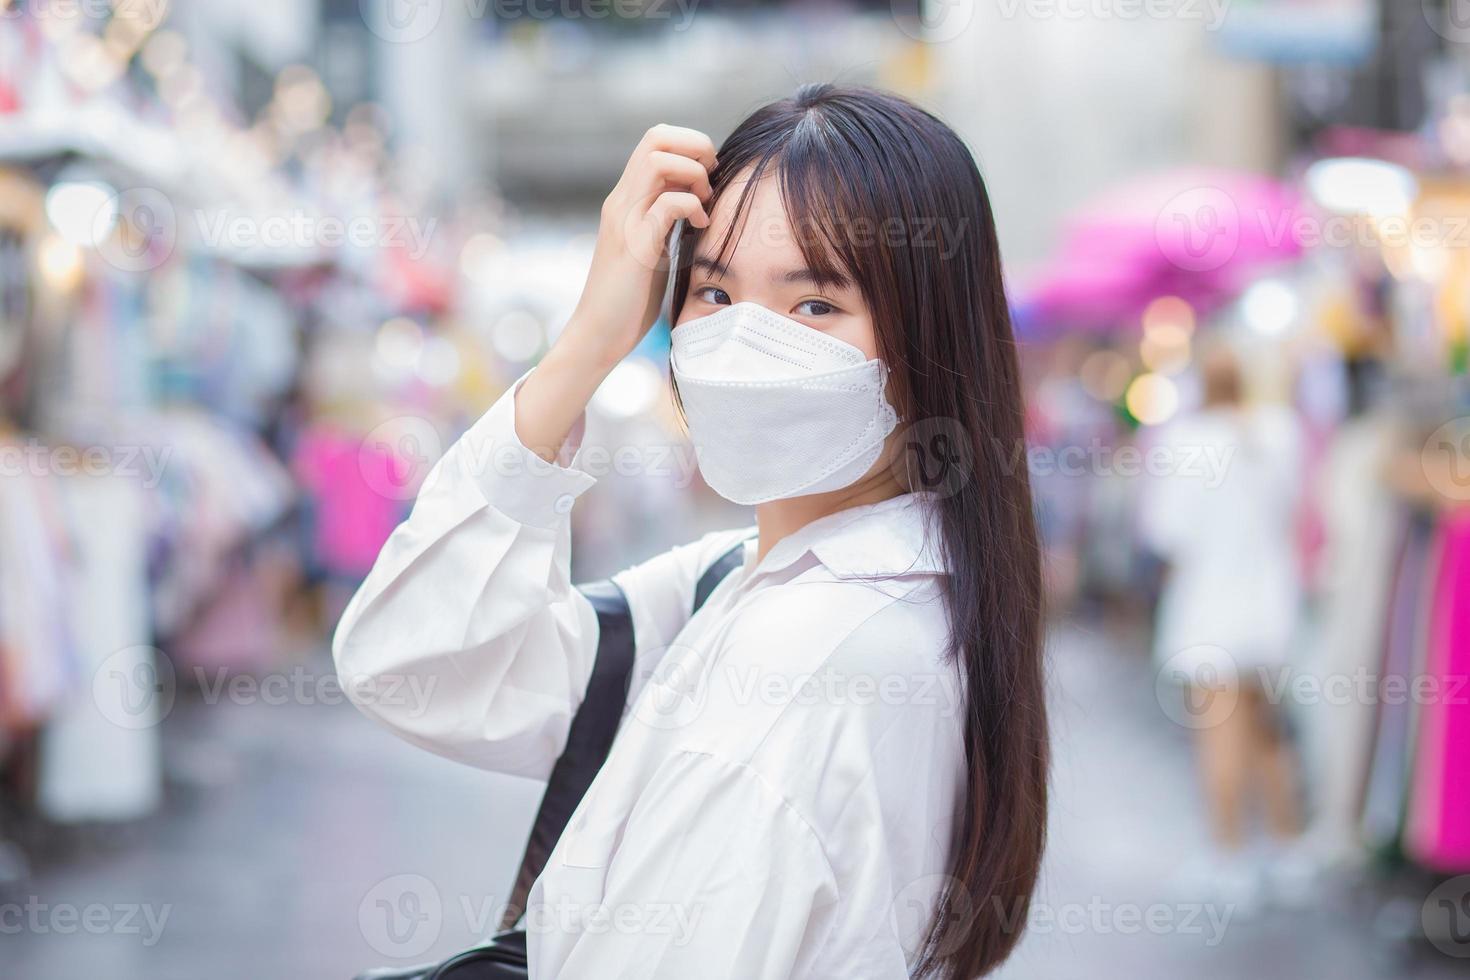 Cute young Asian school girl who wears white shirt and face mask to prevent disease standing and smiling while  outdoors in the city with street with shops in the background. photo